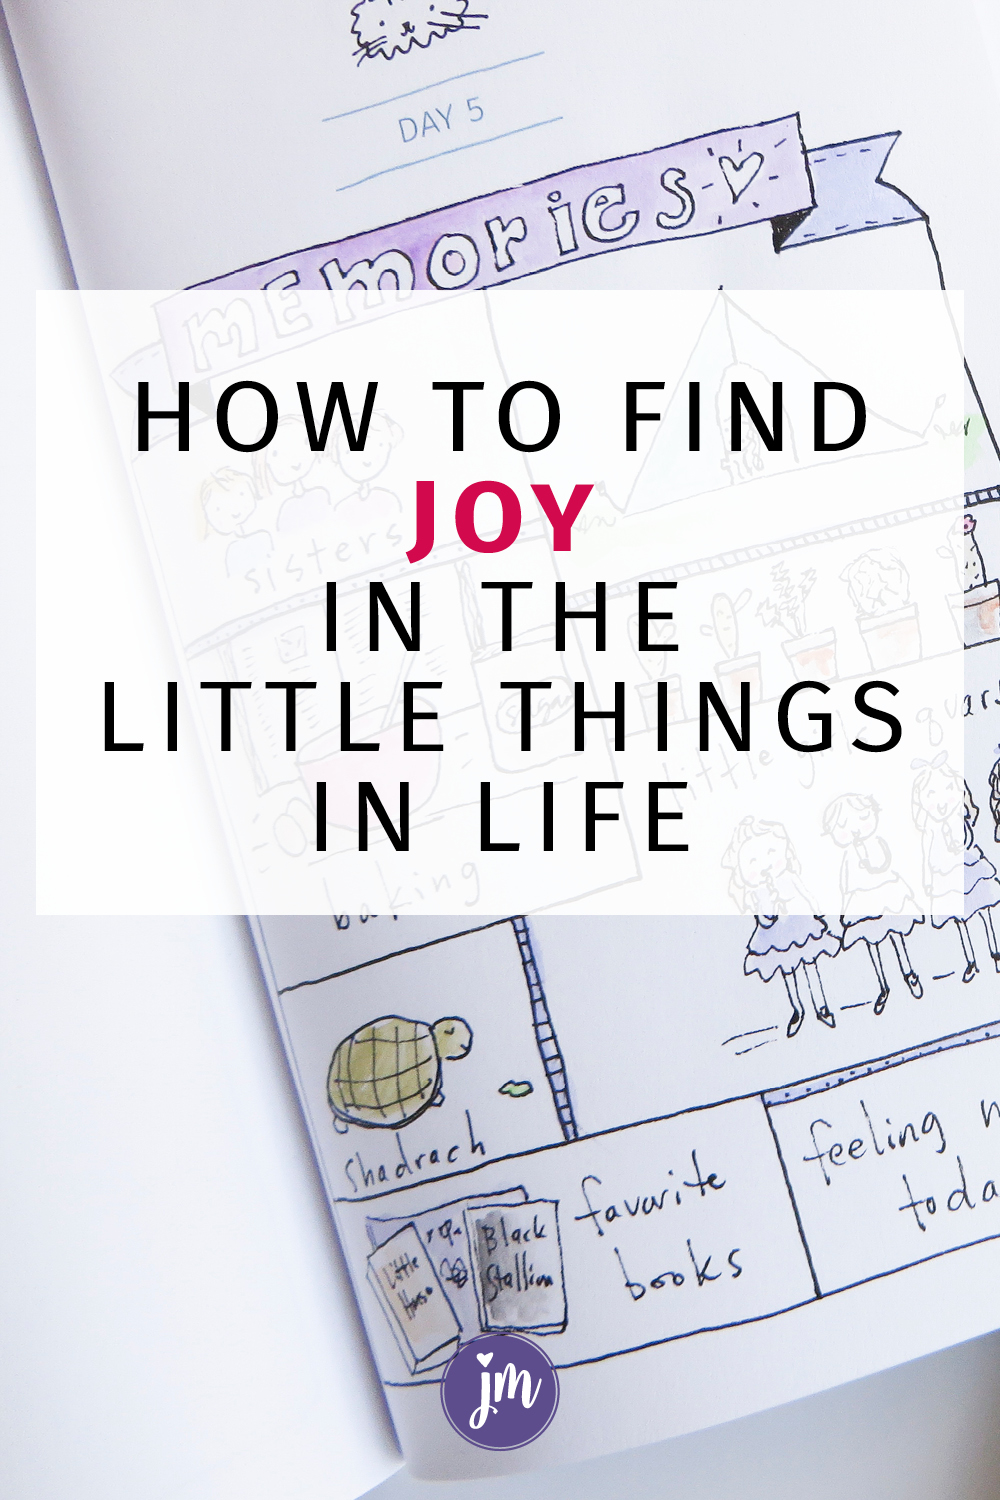 Sometimes finding joy in the little things in life is the most difficult. But with a bit of practice, you can learn to see your world differently and find that your life is truly a gift! Learn how by clicking through to read this article . . .